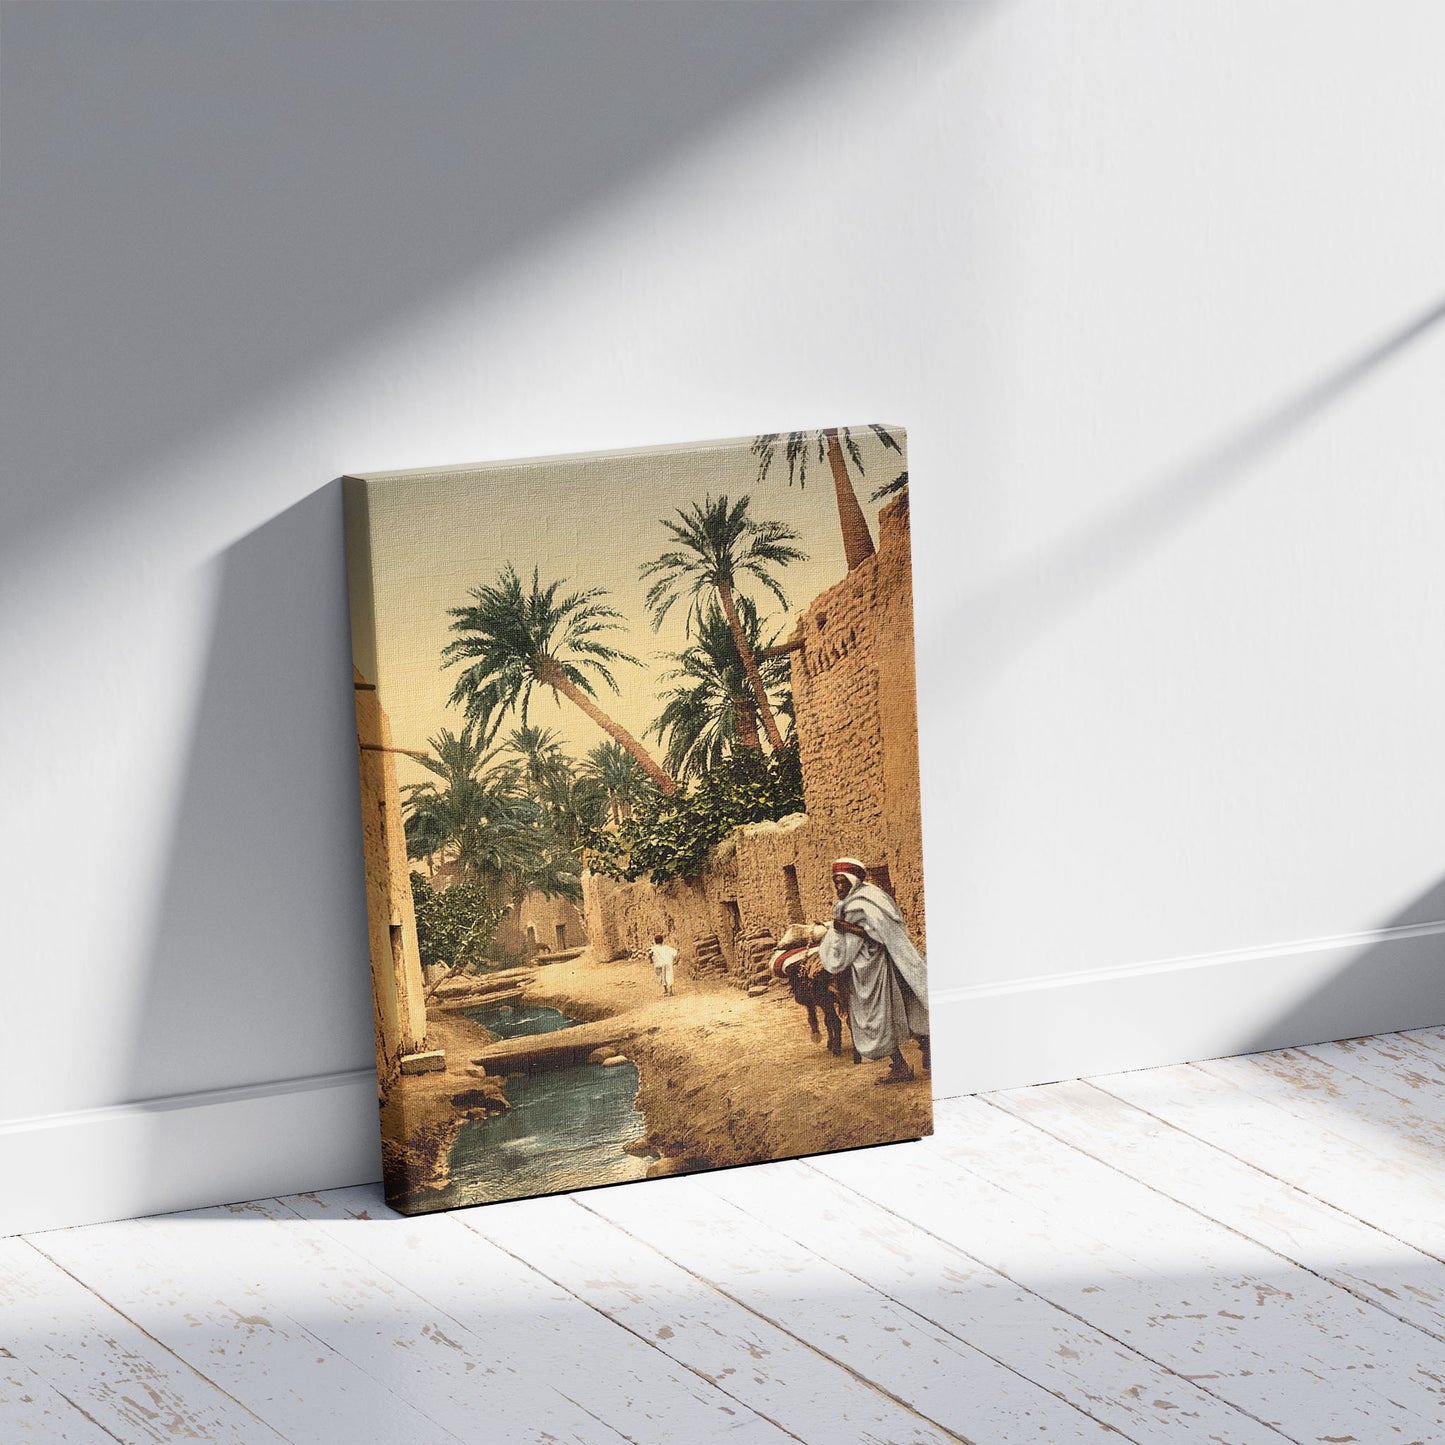 A picture of Street in the old town, I, Biskra, Algeria, a mockup of the print leaning against a wall